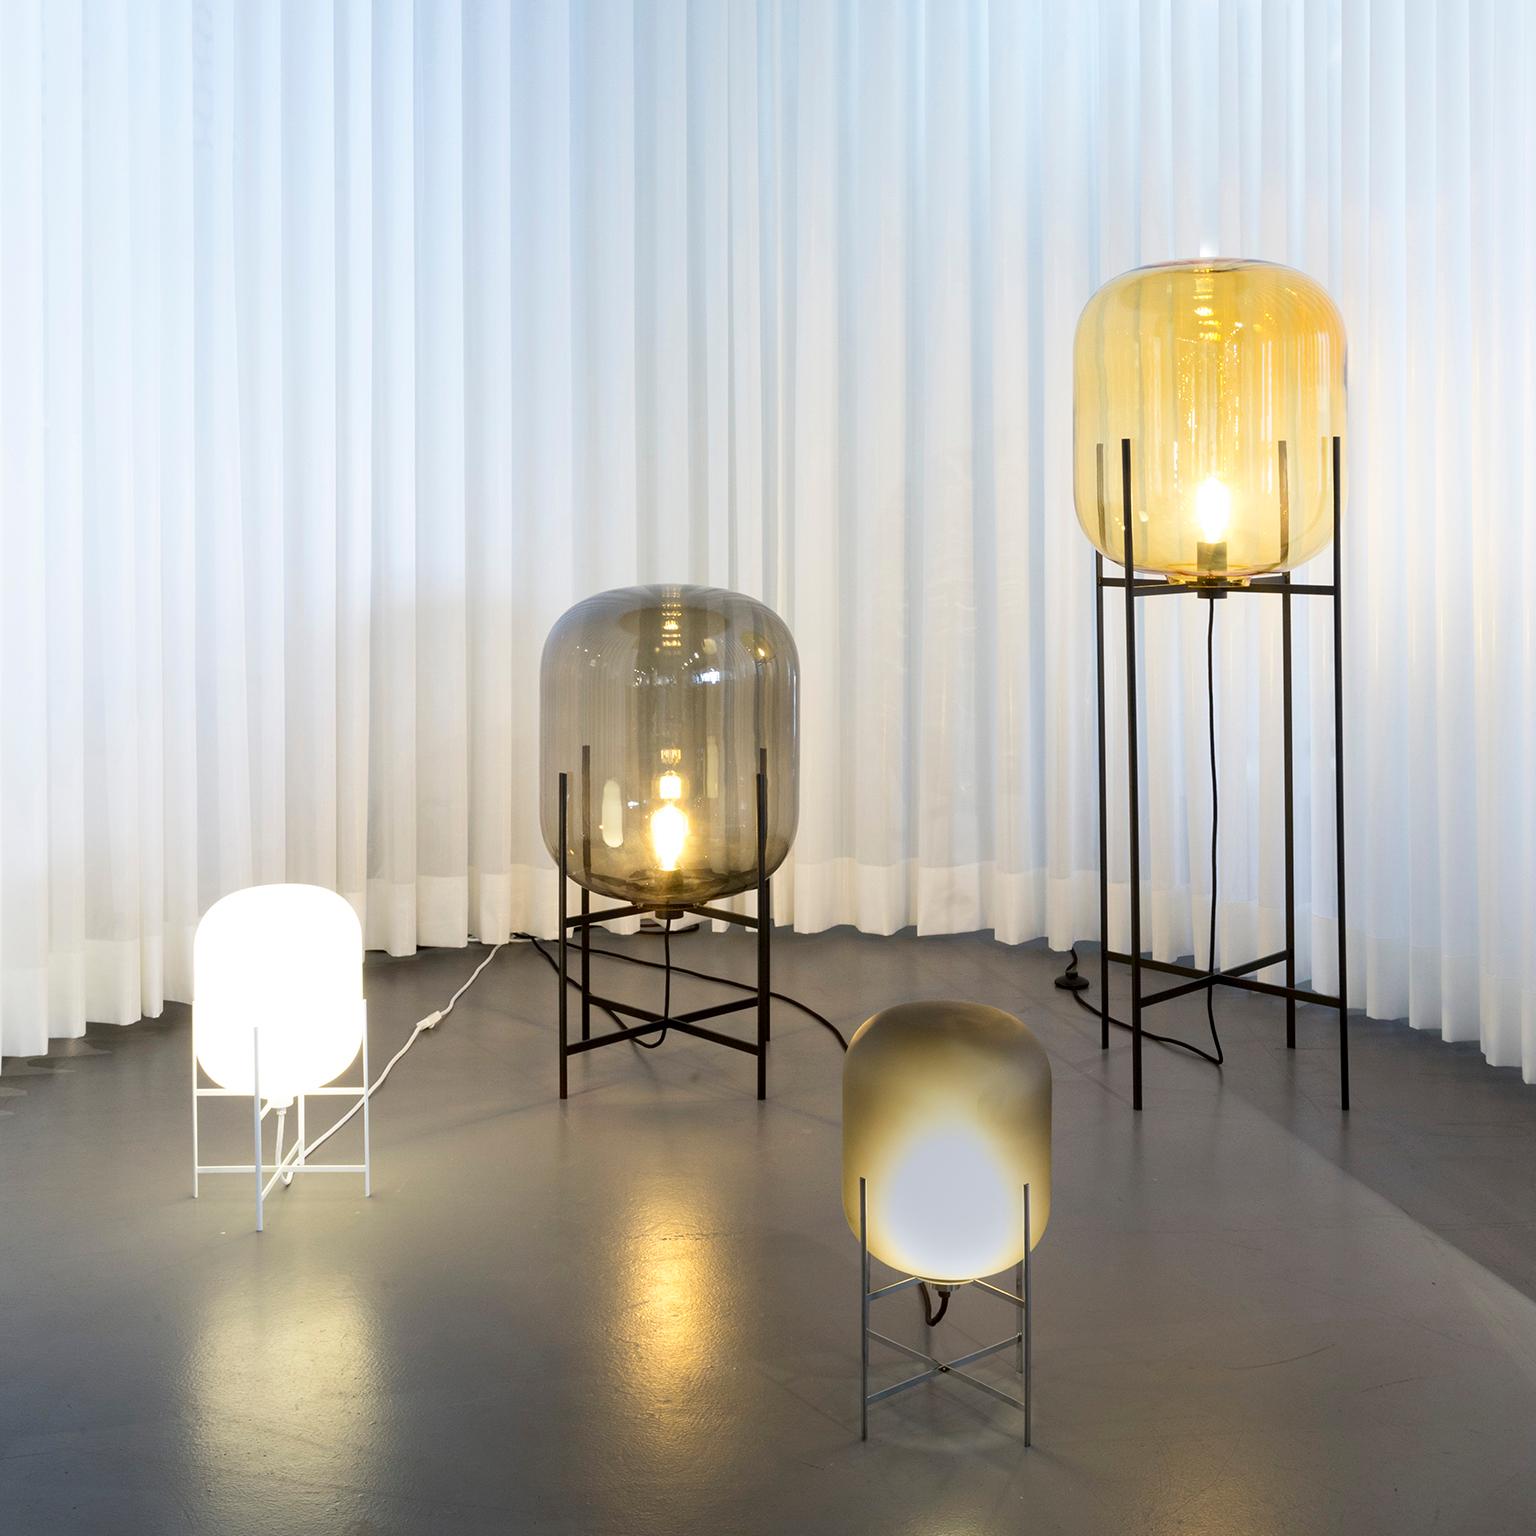 Oda floor lamp - European, Minimalist, Amber, black base, German, 21st century, lamp

Directly inspired by the industrial monuments photographed by the famous artists Bernd and Hilla Becher, Sebastian Herkner bundles up their outer shape and inner